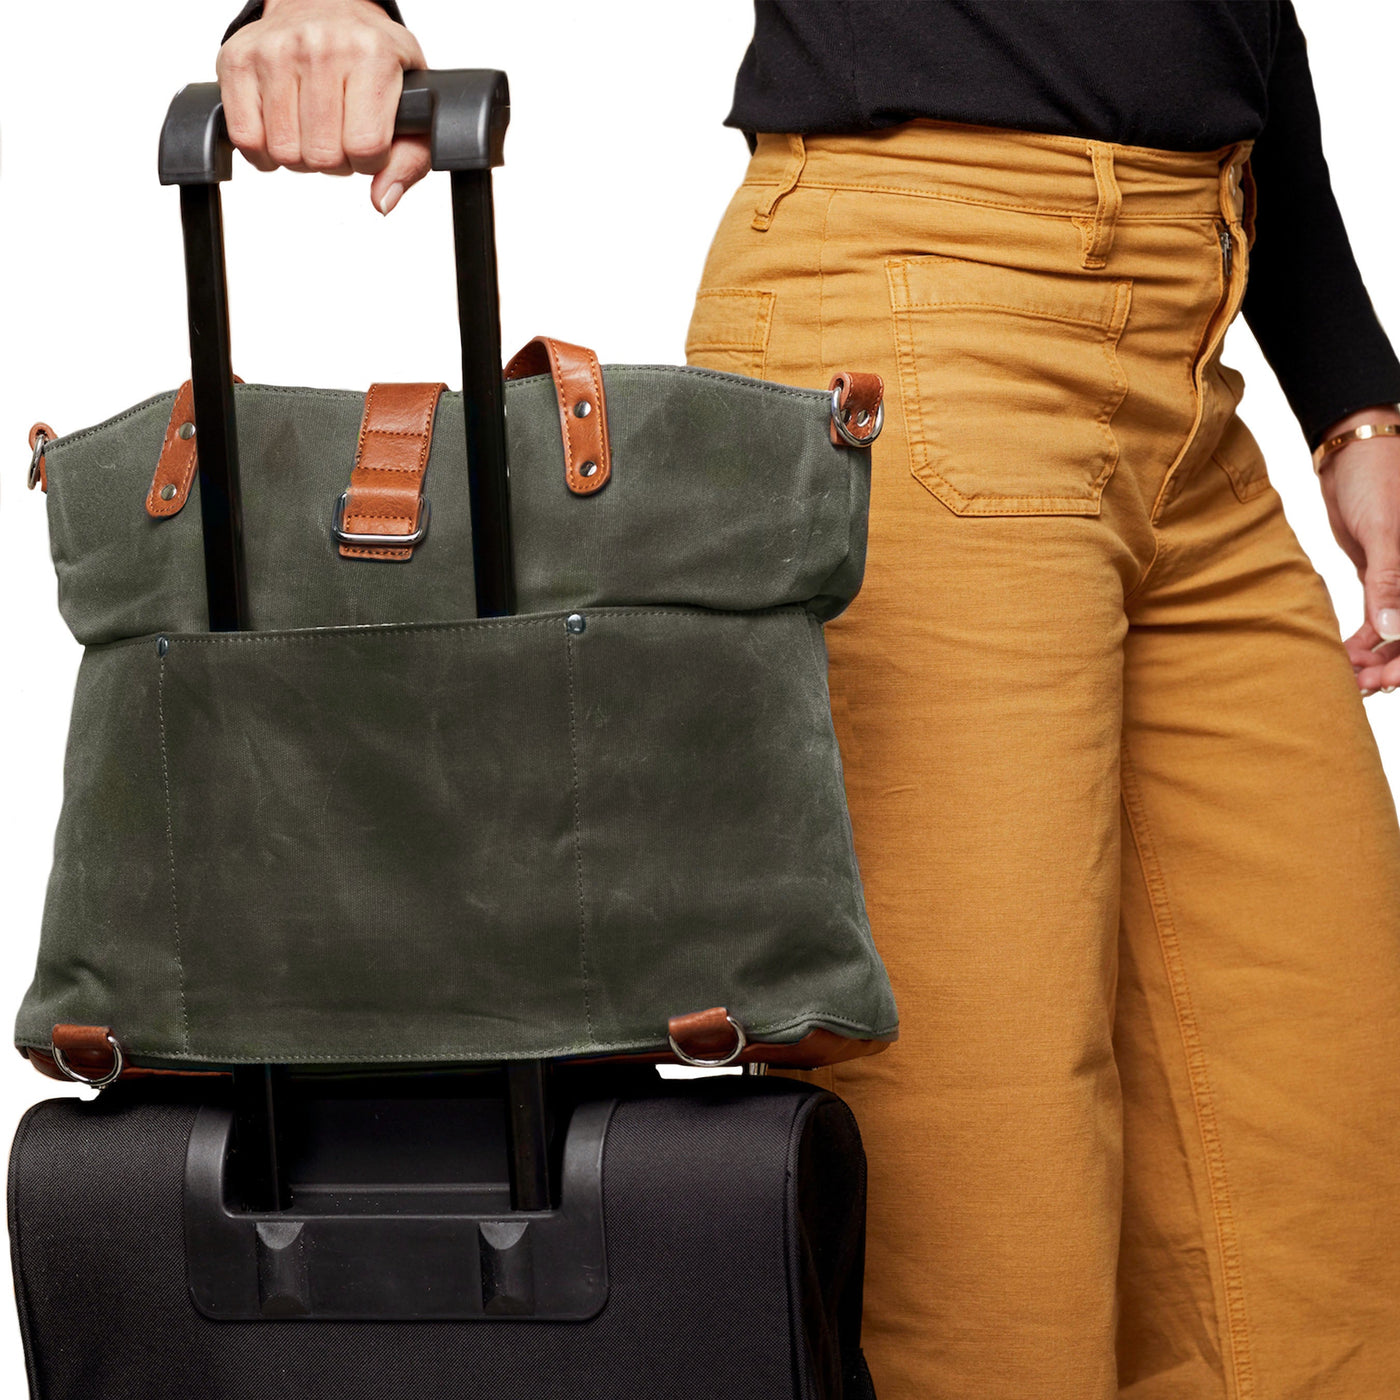 Forest green waxed canvas tote mounted on luggage handle of black rolling bag using sleeve pocket, with mom pulling.